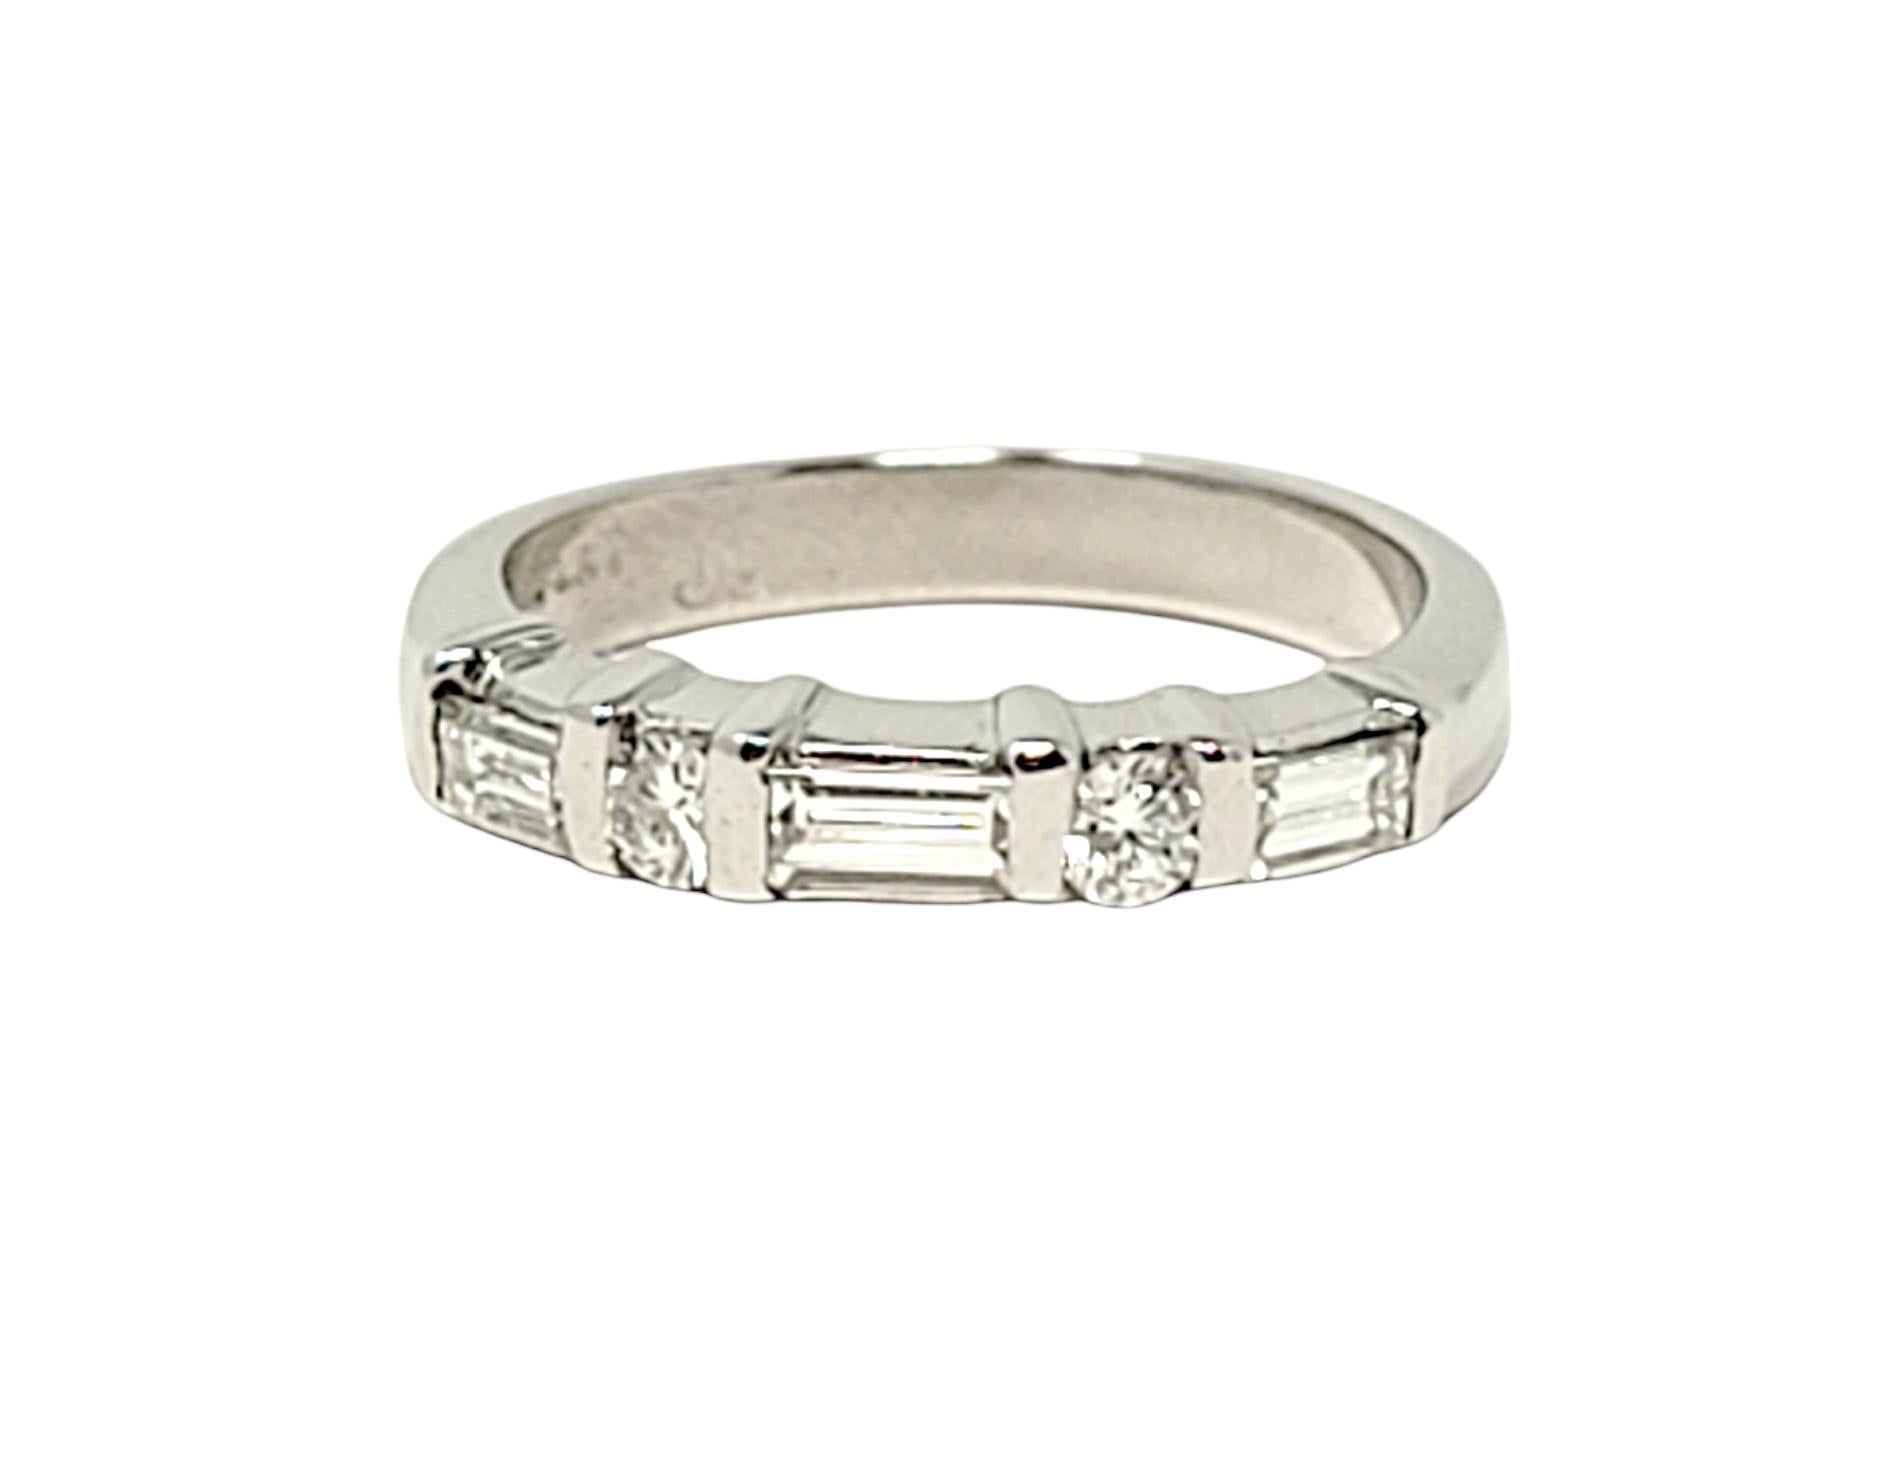 Women's .55 Carat Total Alternating Round and Baguette Diamond Band Ring in Platinum